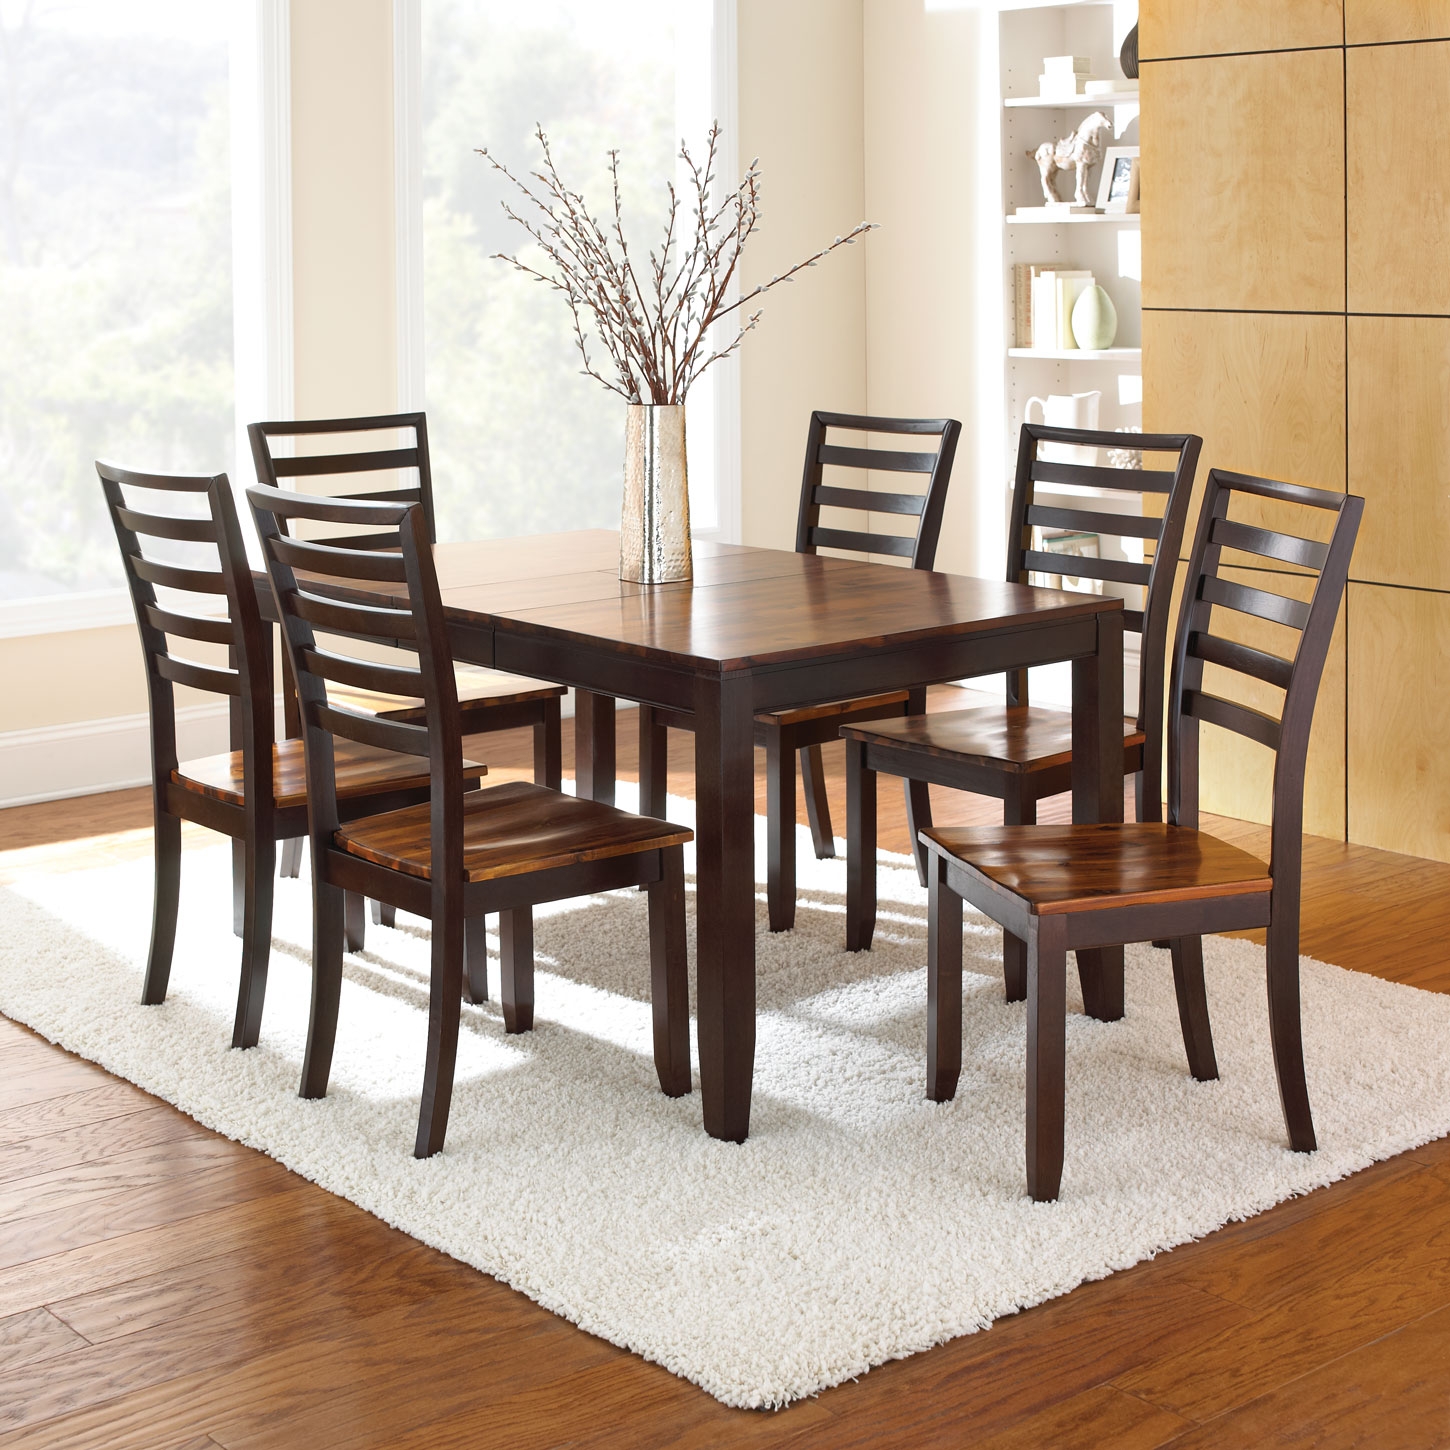 Steve Silver Co.® Abaco 7 Piece Dining Set